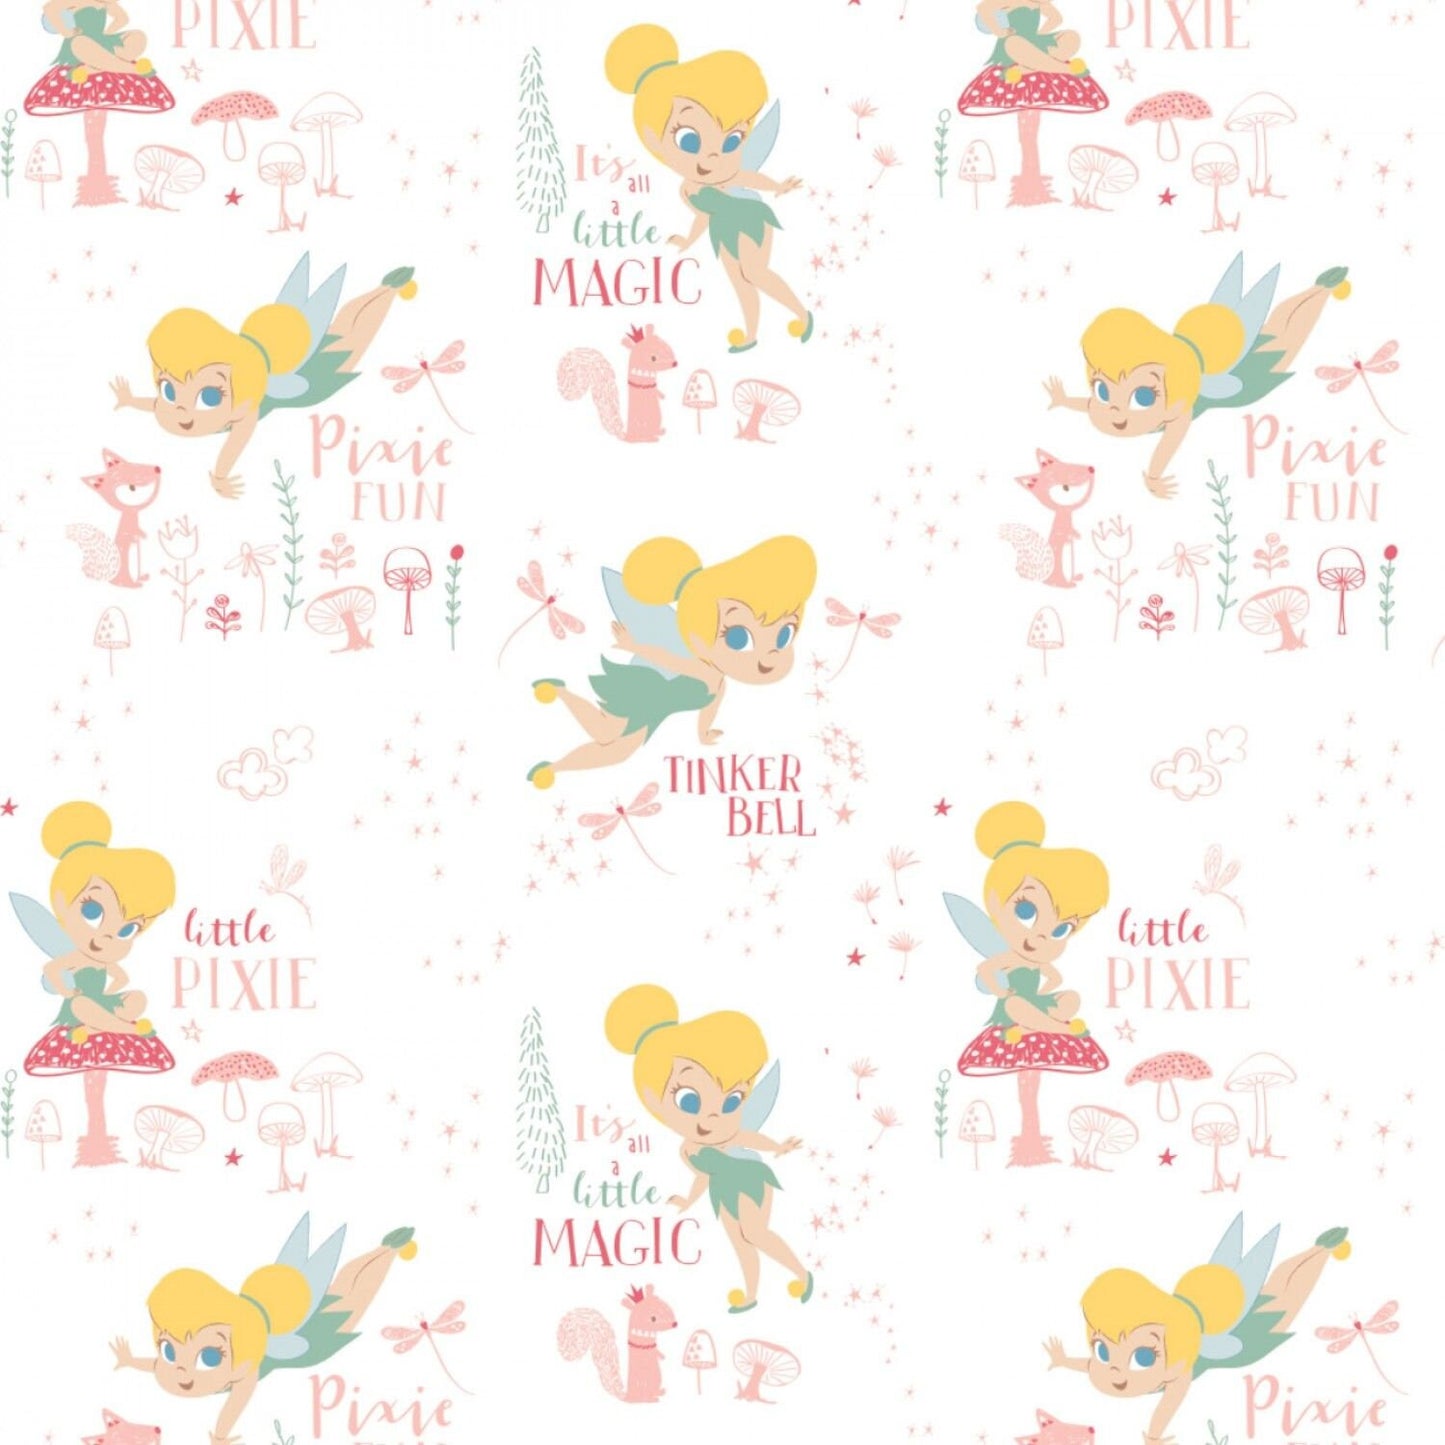 Peter Pan & Tinker Bell Tinker Bell Pixie Magic White # 85400301 1 Cotton Woven Fabric